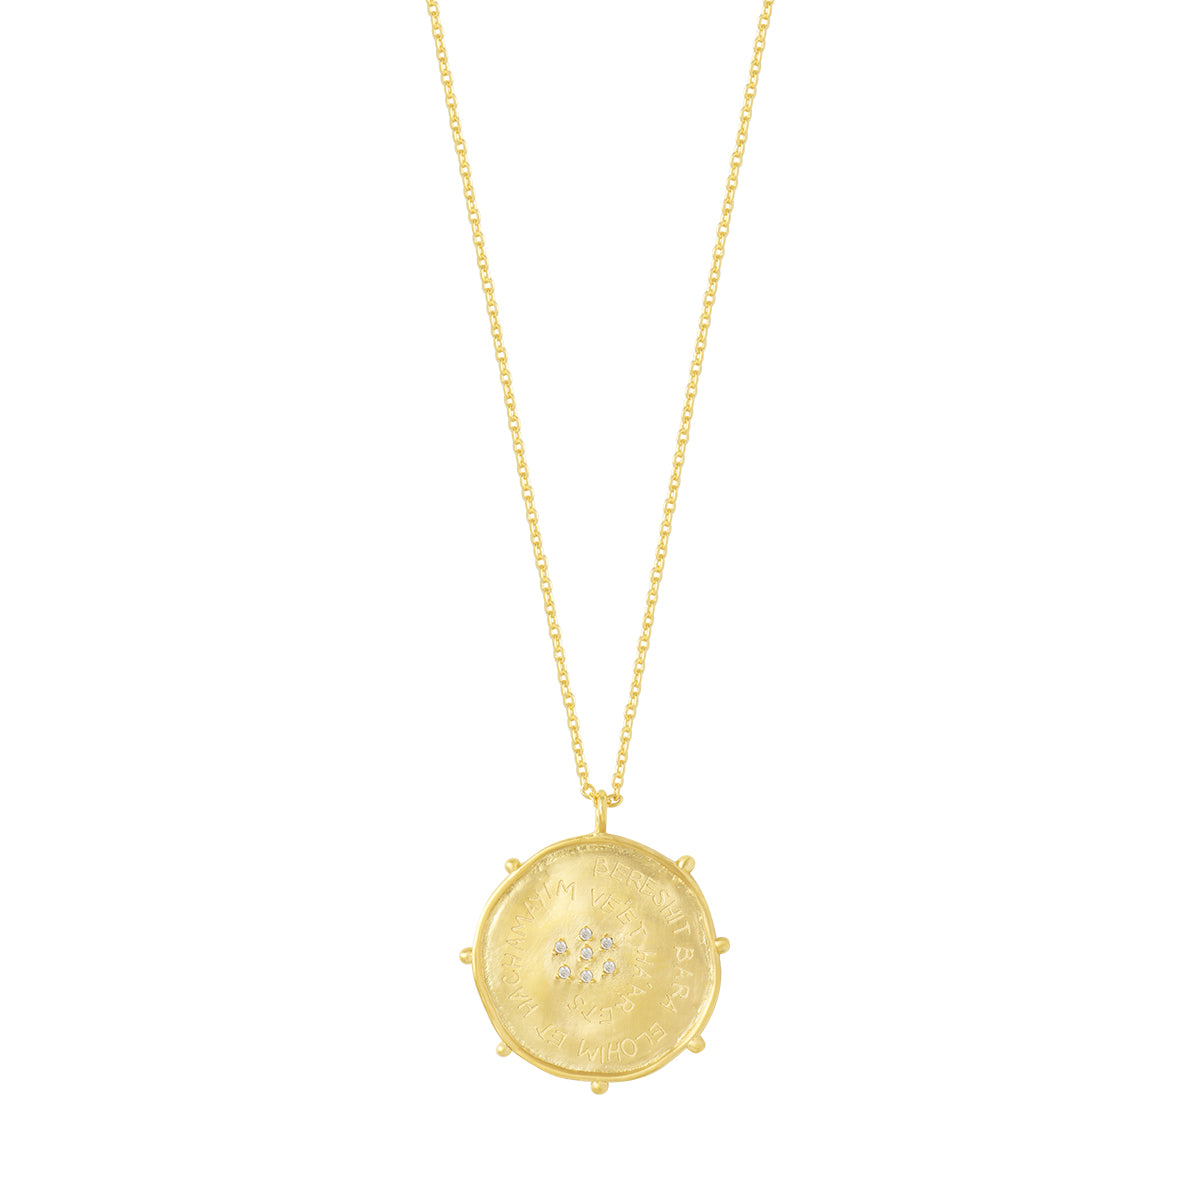 gold plated pendant necklace louise hendricks eden necklace